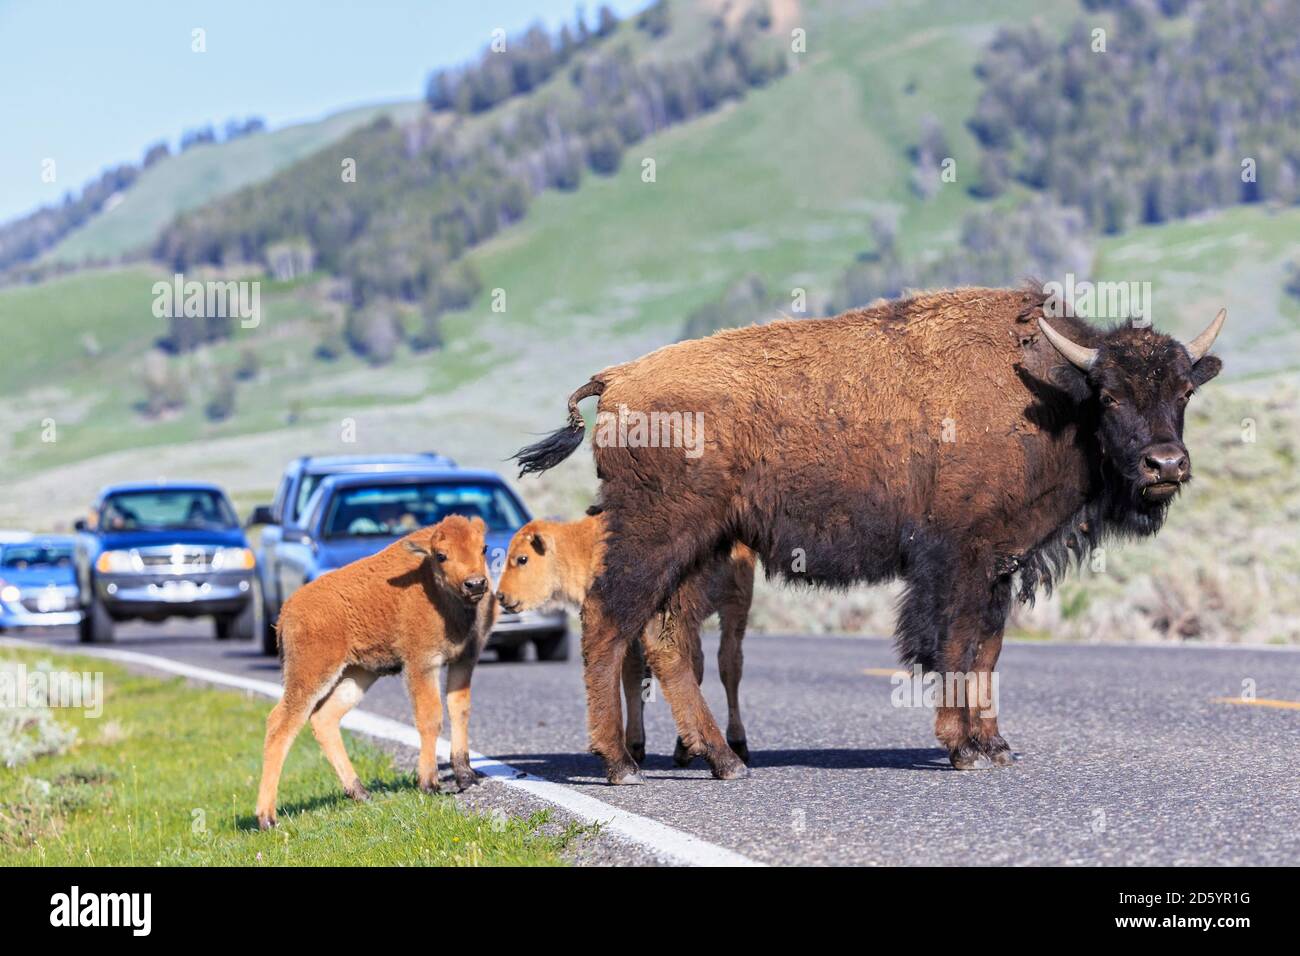 USA, Yellowstone National Park, Bisons crossing road Stock Photo